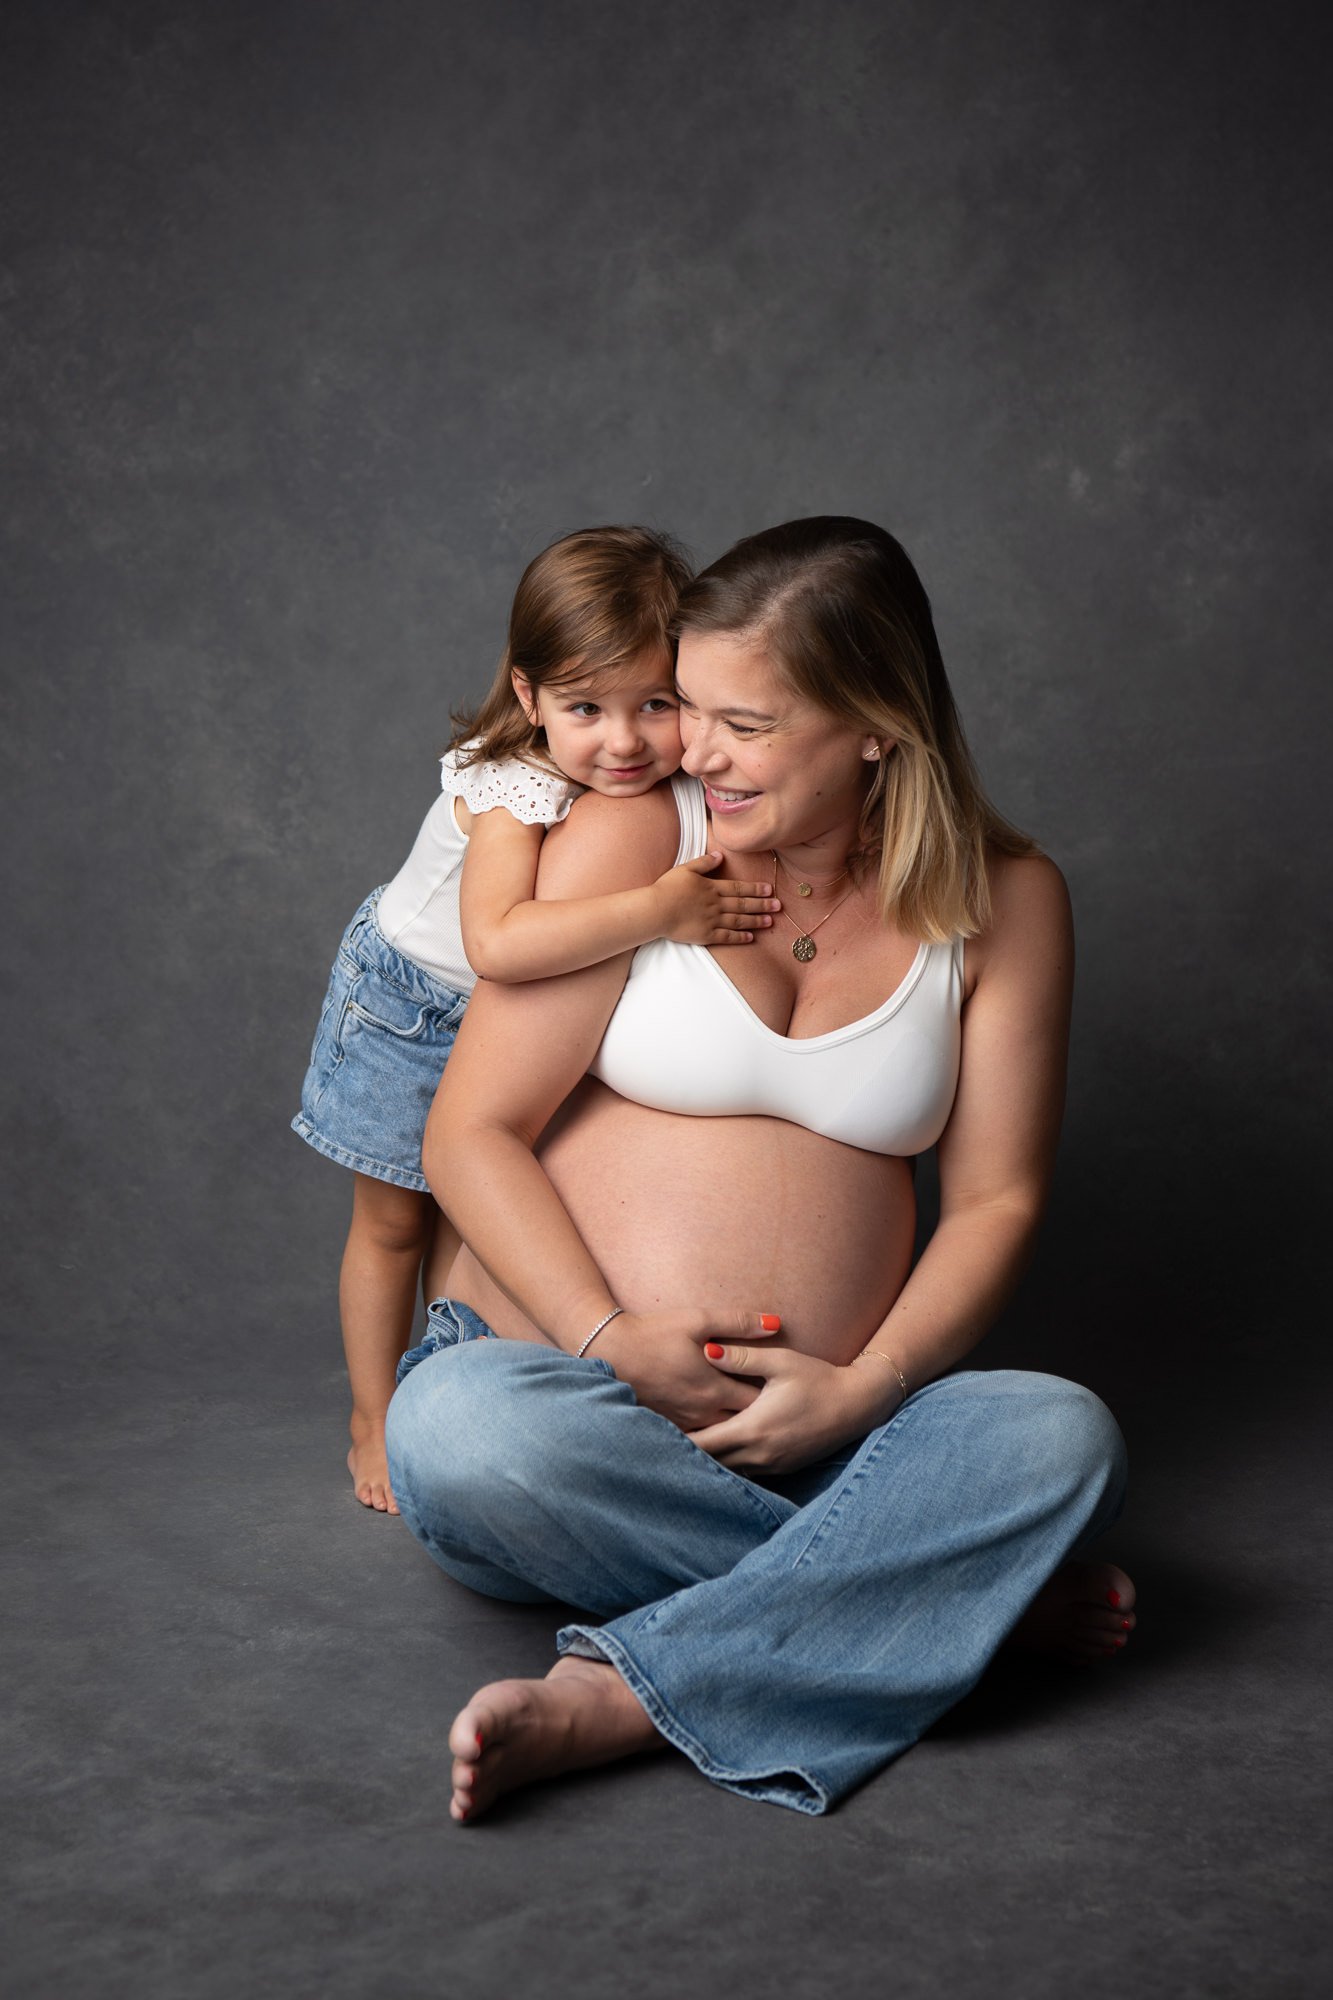  A mother sits with her legs crossed and pregnant belly in between while her little girl hugs her from behind by Nicole Hawkins Photography. mother daughter poses with pregnant belly #NicoleHawkinsPhotography #NicoleHawkinsMaternity #MaternityStudioP